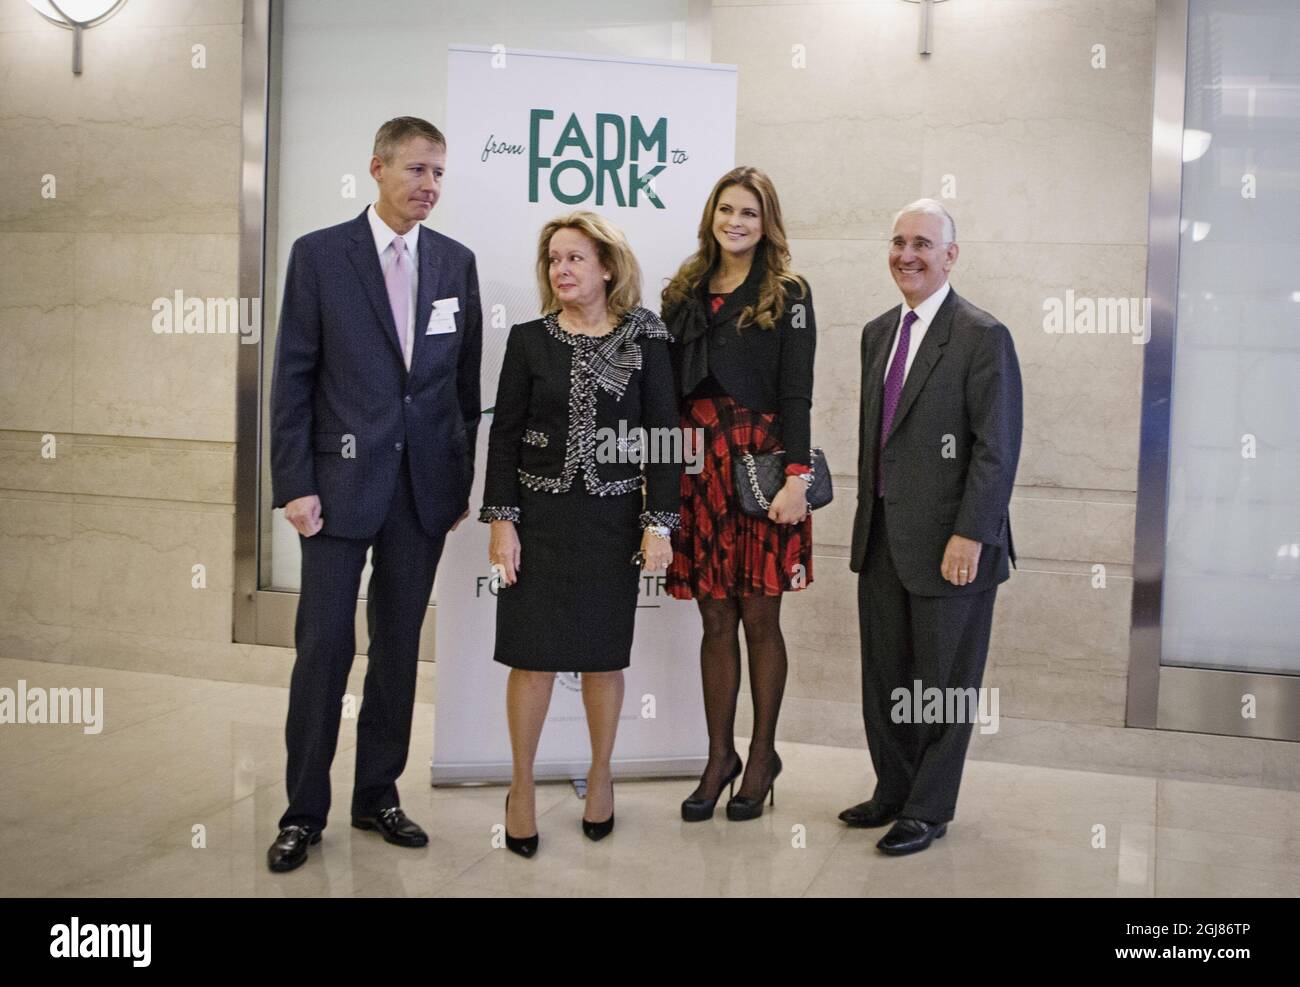 NEW YORK 2013-10-23 From left, Frederick Johansson, SACC (Swedish-American Chamber of Commerce), ReneÃƒÂ© Lundholm, President SACC, Princess Madeleine, Samuel A. di Piazza, Jr., Citigroup, arriving at the summit 'From Farm to Fork' in SACC's auspices in New York on Wednesday October 23, 2013. Foto: Linda Forsell / TT / kod 200  Stock Photo